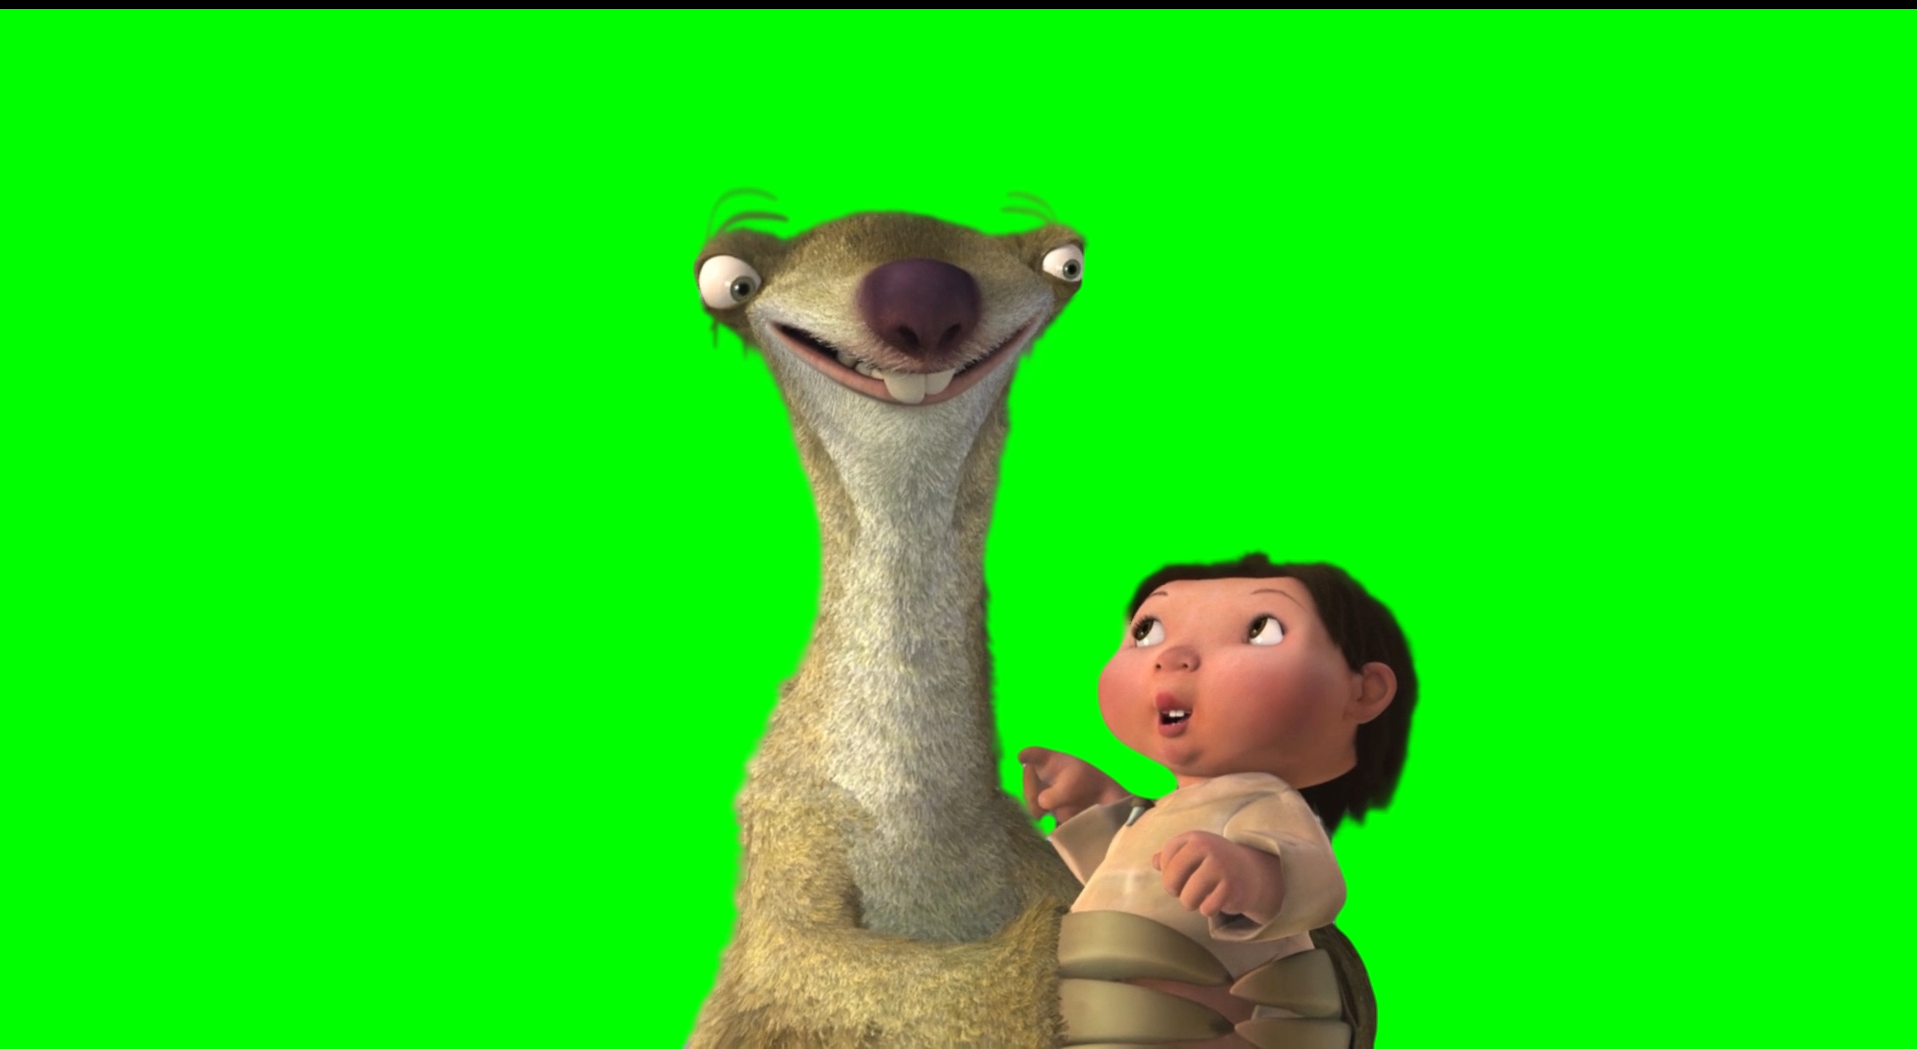 Sid and Ice Age Baby Poking Each Other meme (Green Screen)